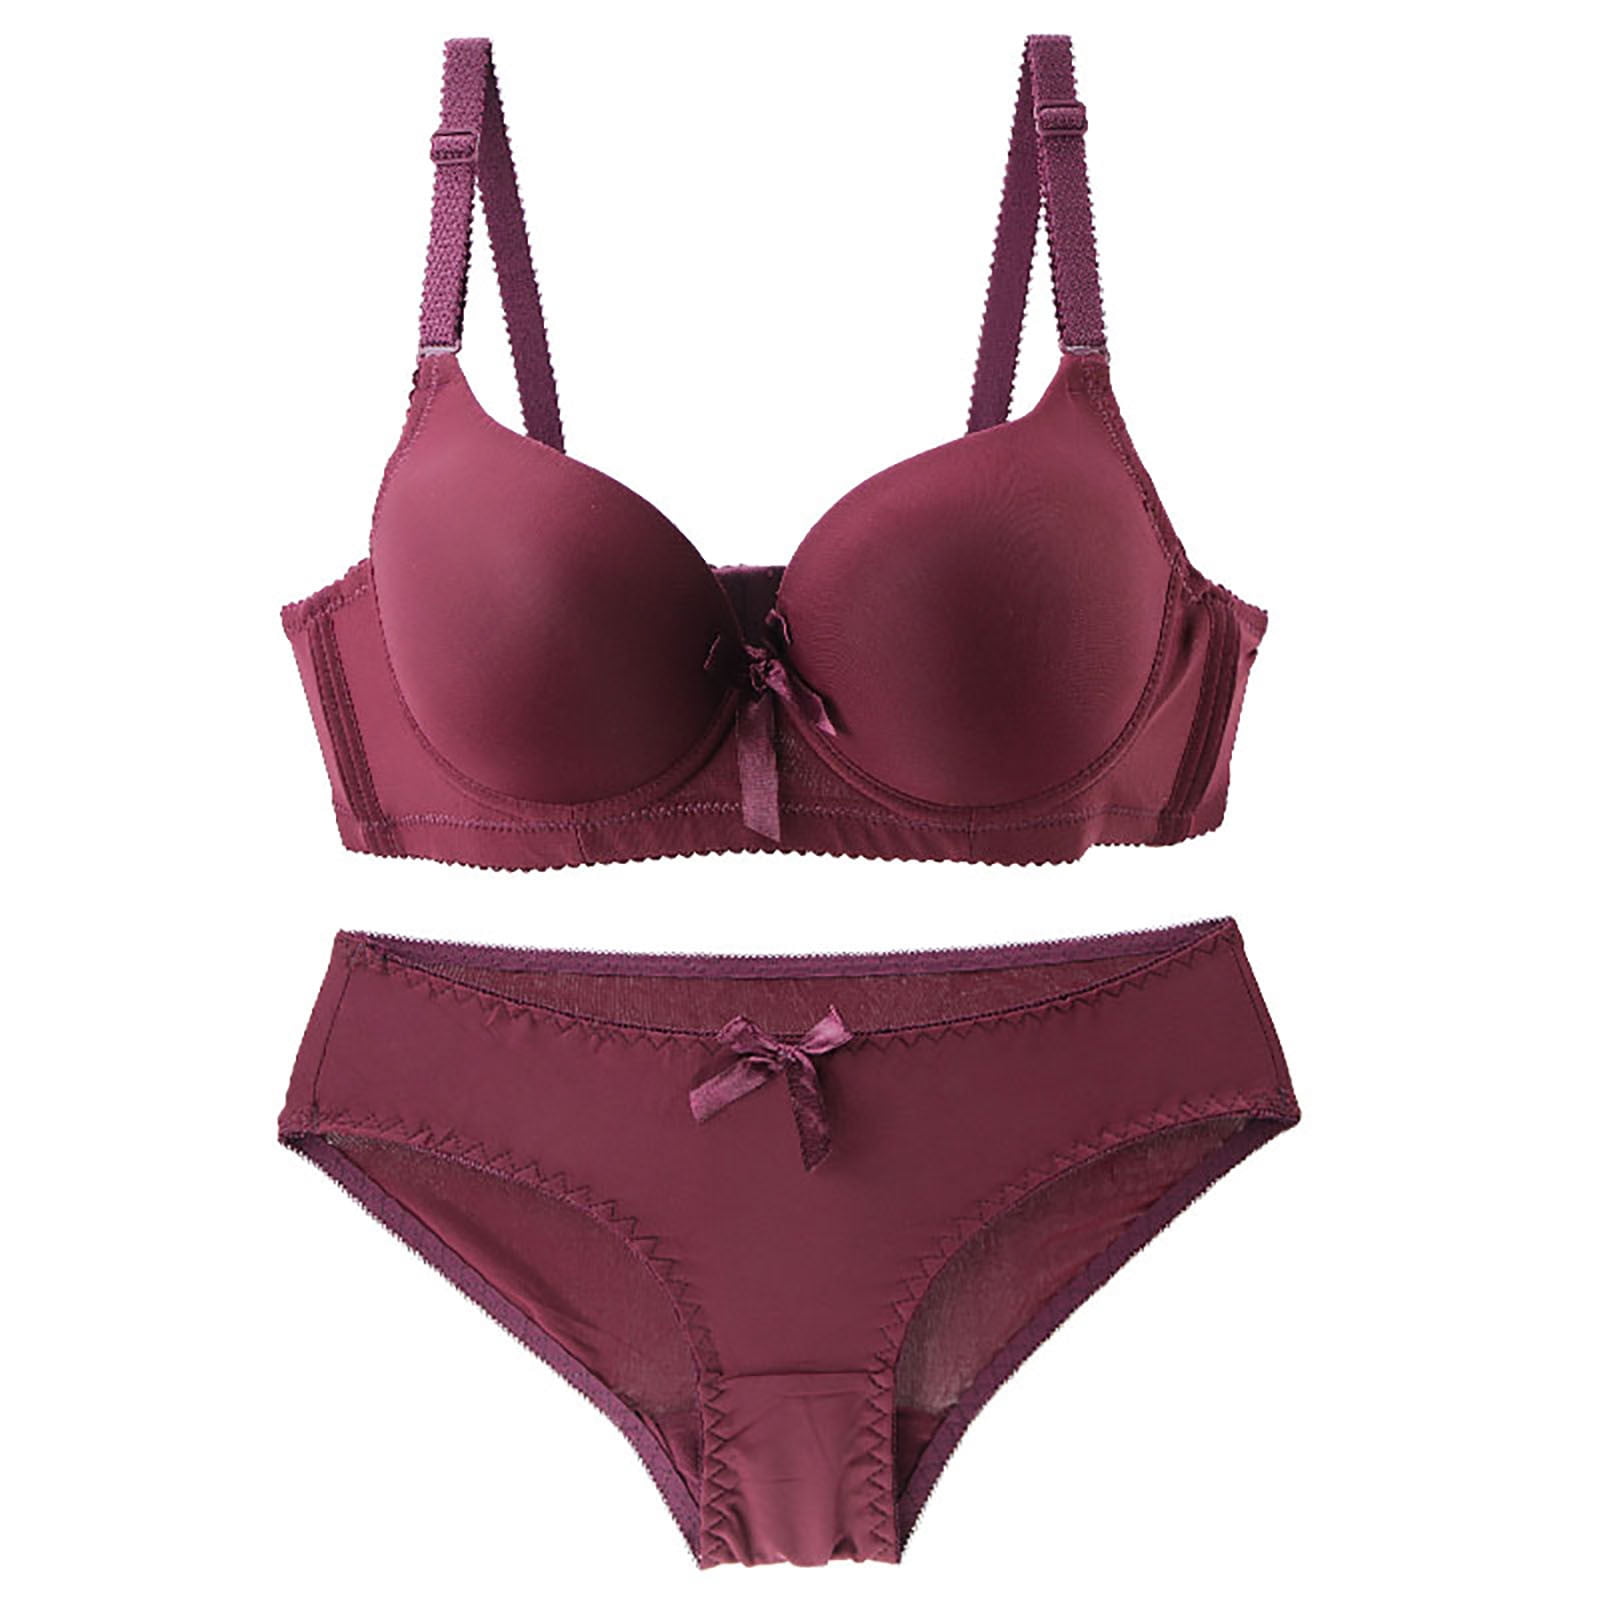 GuessLookry 2023 Great Womens Women's Lingerie Set Sexy Bra And Panties  Summer Thin Lingerie Set Holiday or Birthday Gifts 